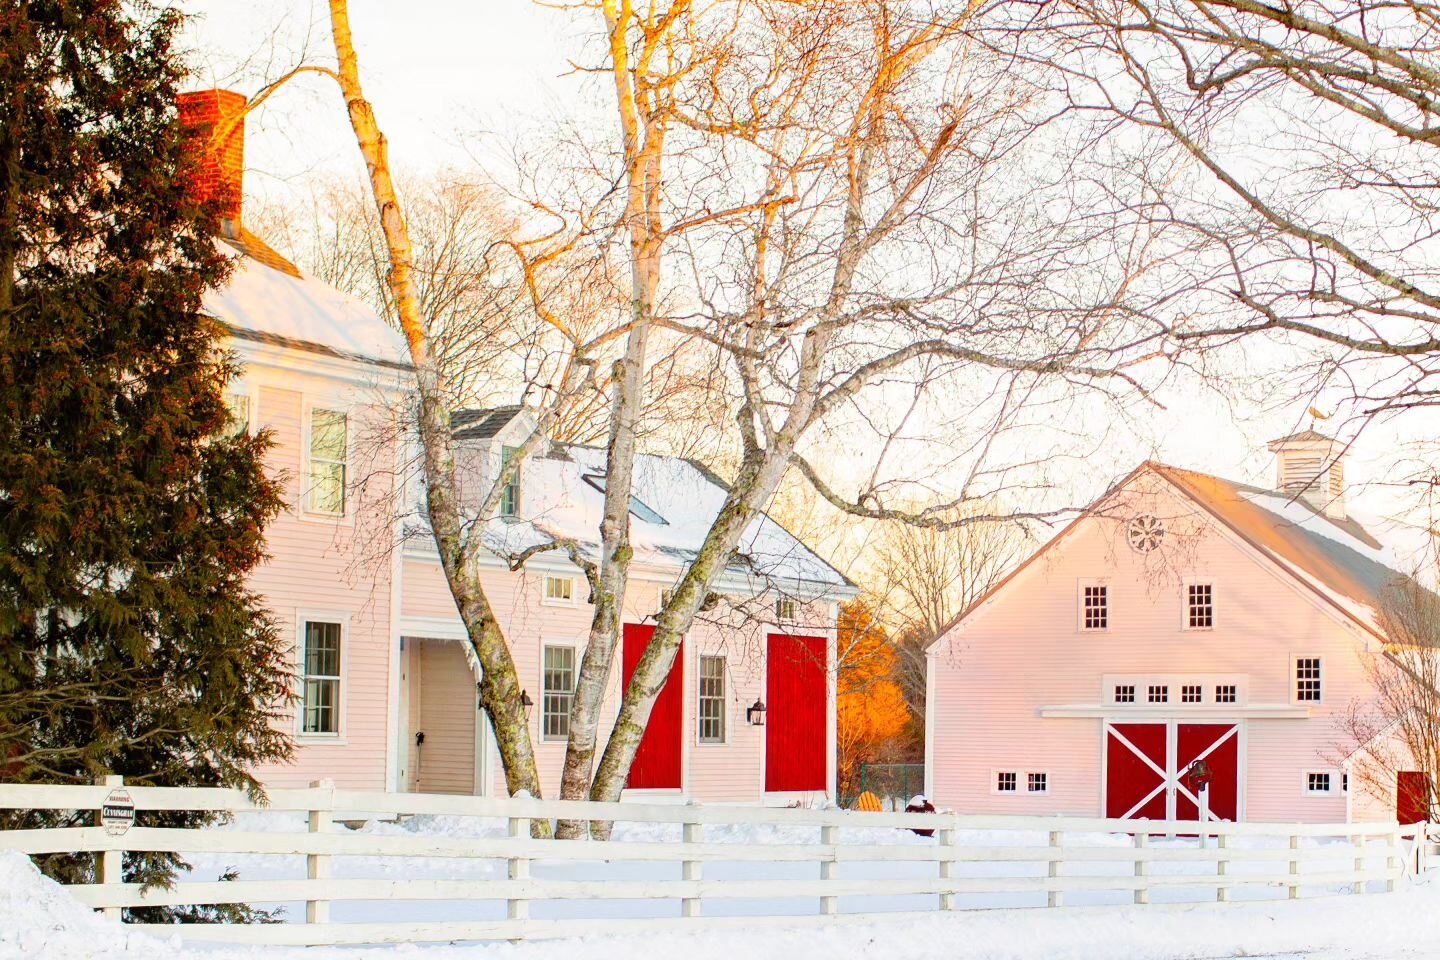 The morning after the first snow!
.
.
.
.
#tiffanymizzellphotography #kennebunk #Kennebunkmaine #maine #newengland #mynewengland #rslove #dslooking #mybhg #myoklstyle #theeverygirl #countrylivingmag #countryliving #pinkfarmhouse #pinkbarn #mainewinte